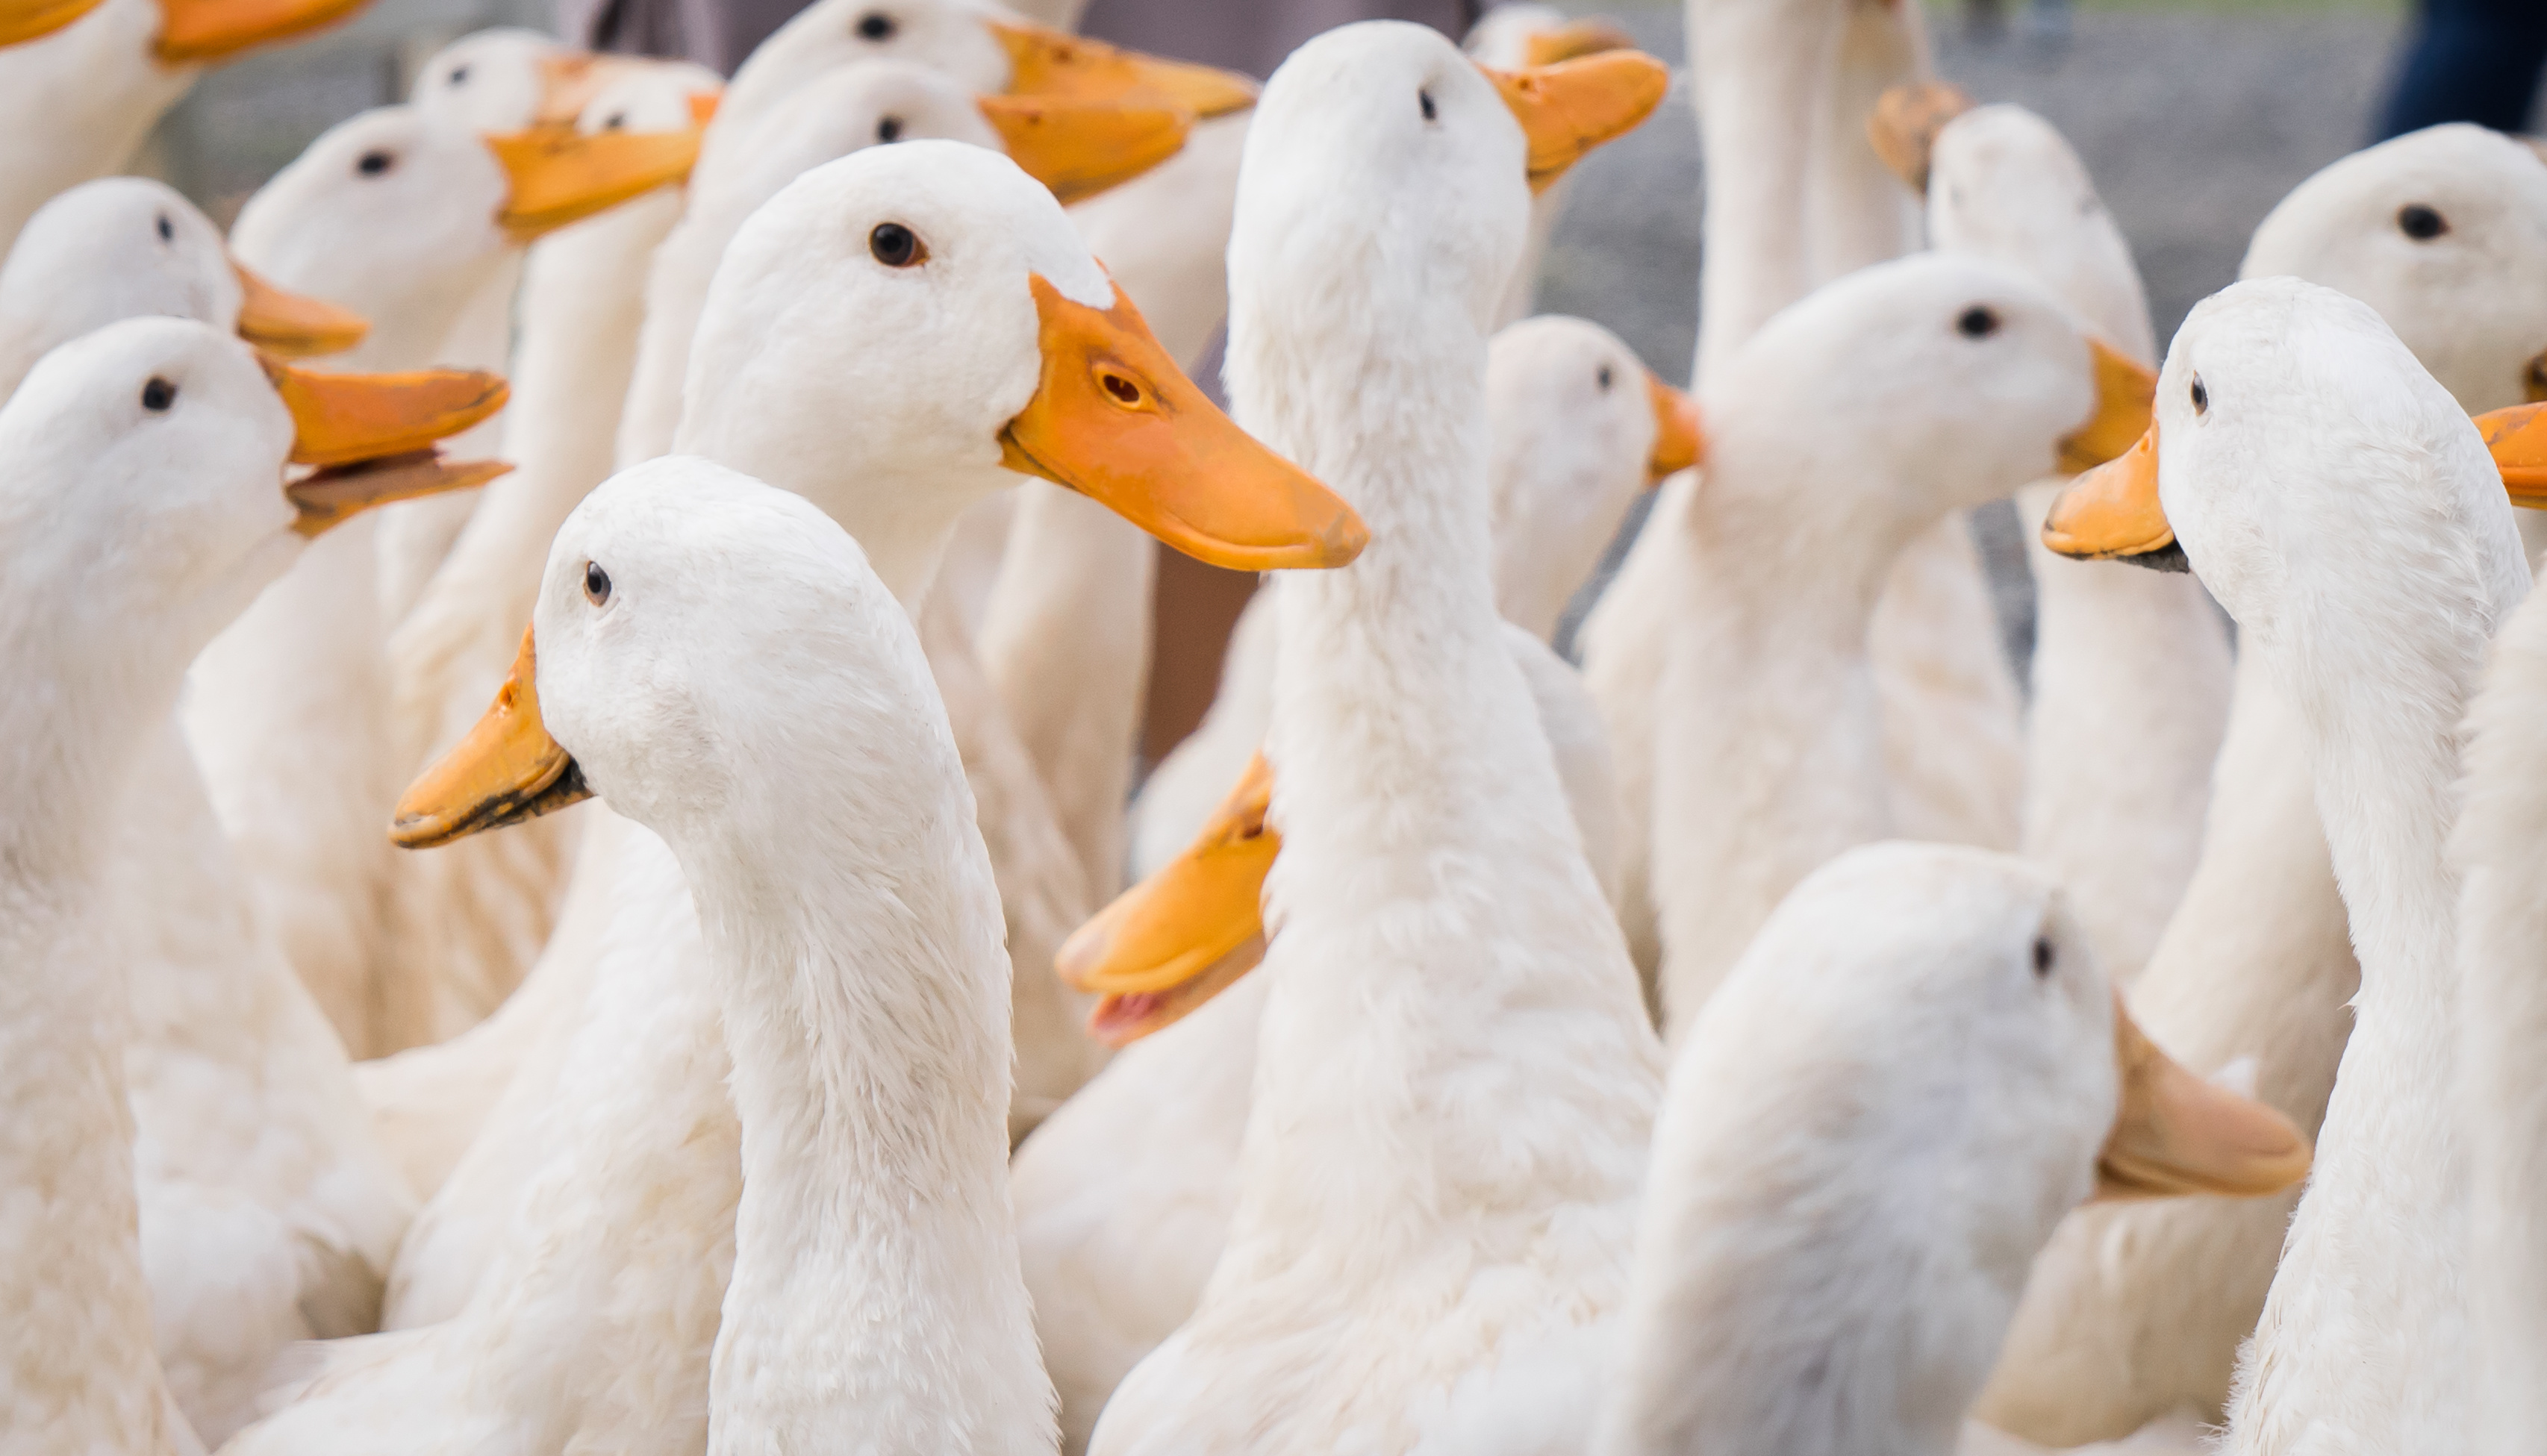 About 80 percent of the world's ducks are raised in China